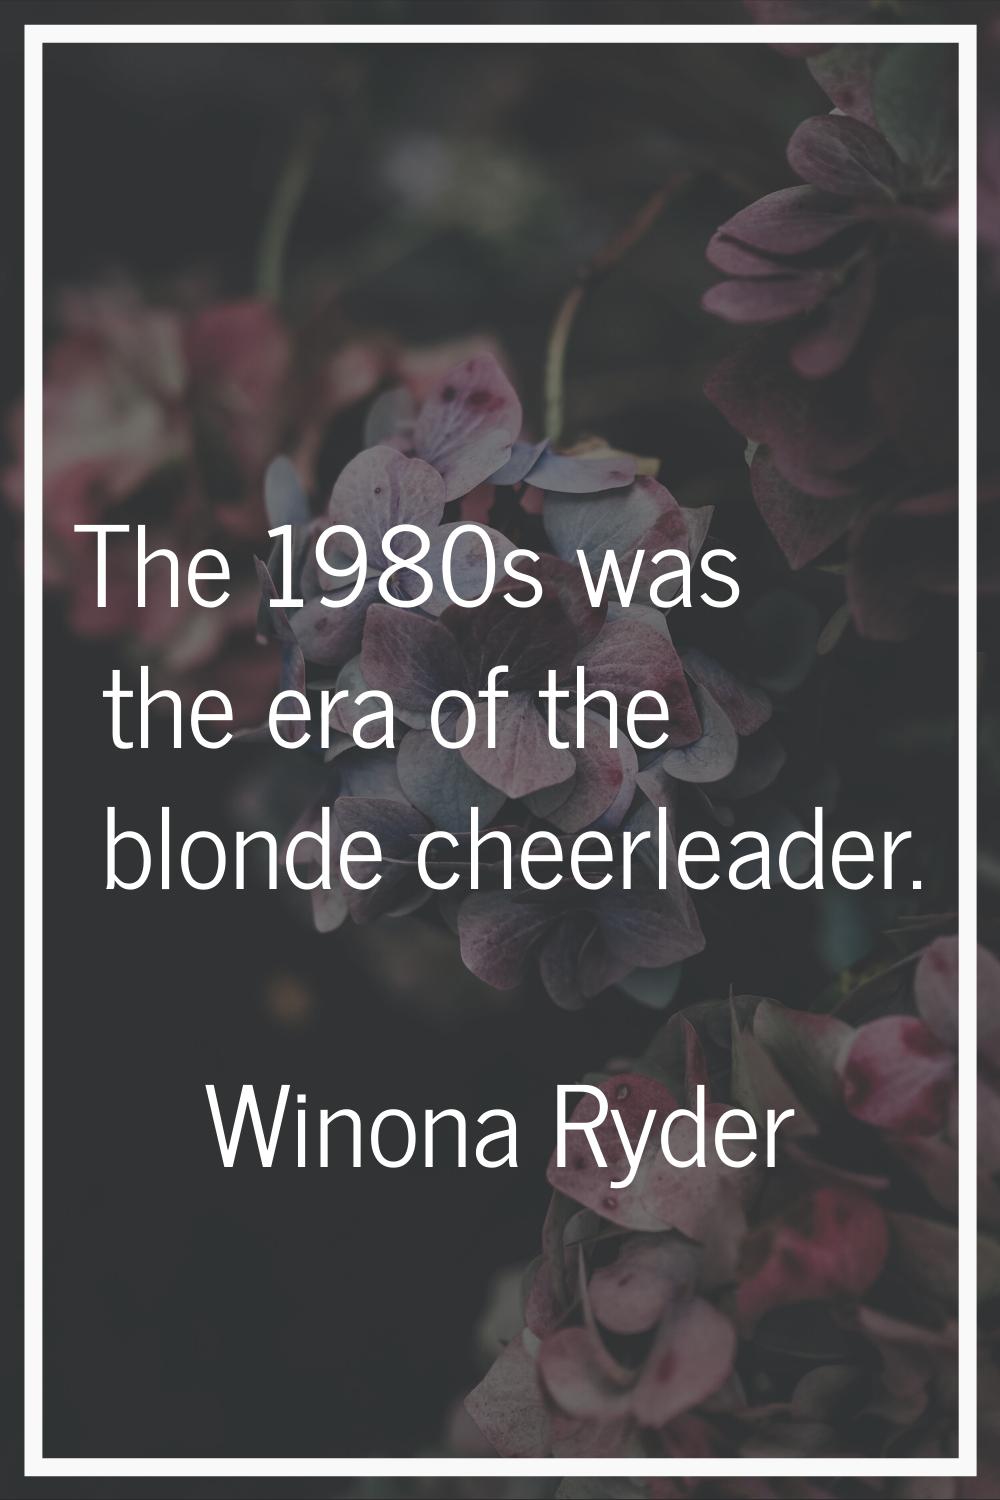 The 1980s was the era of the blonde cheerleader.